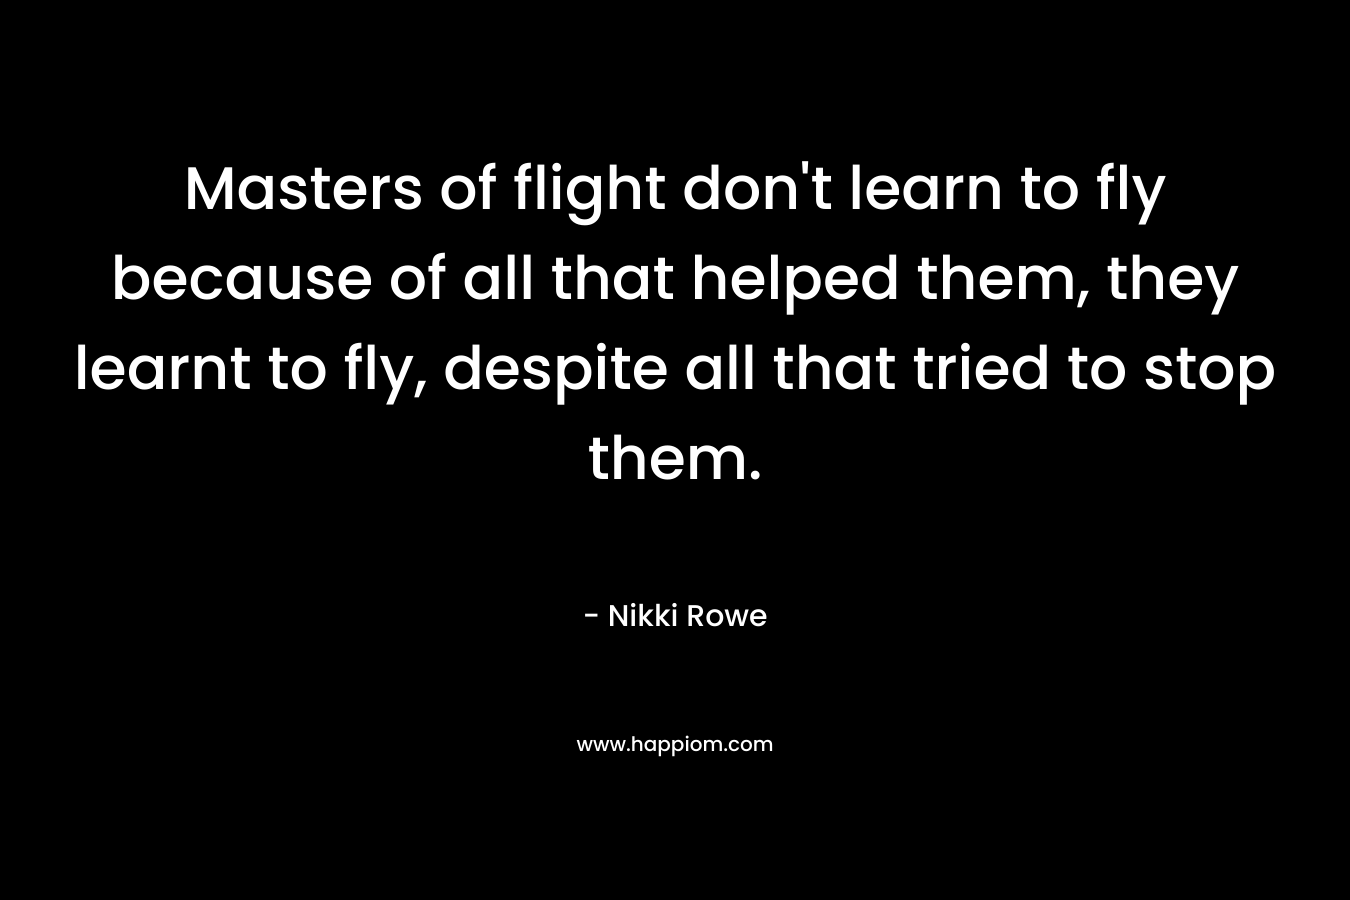 Masters of flight don't learn to fly because of all that helped them, they learnt to fly, despite all that tried to stop them.